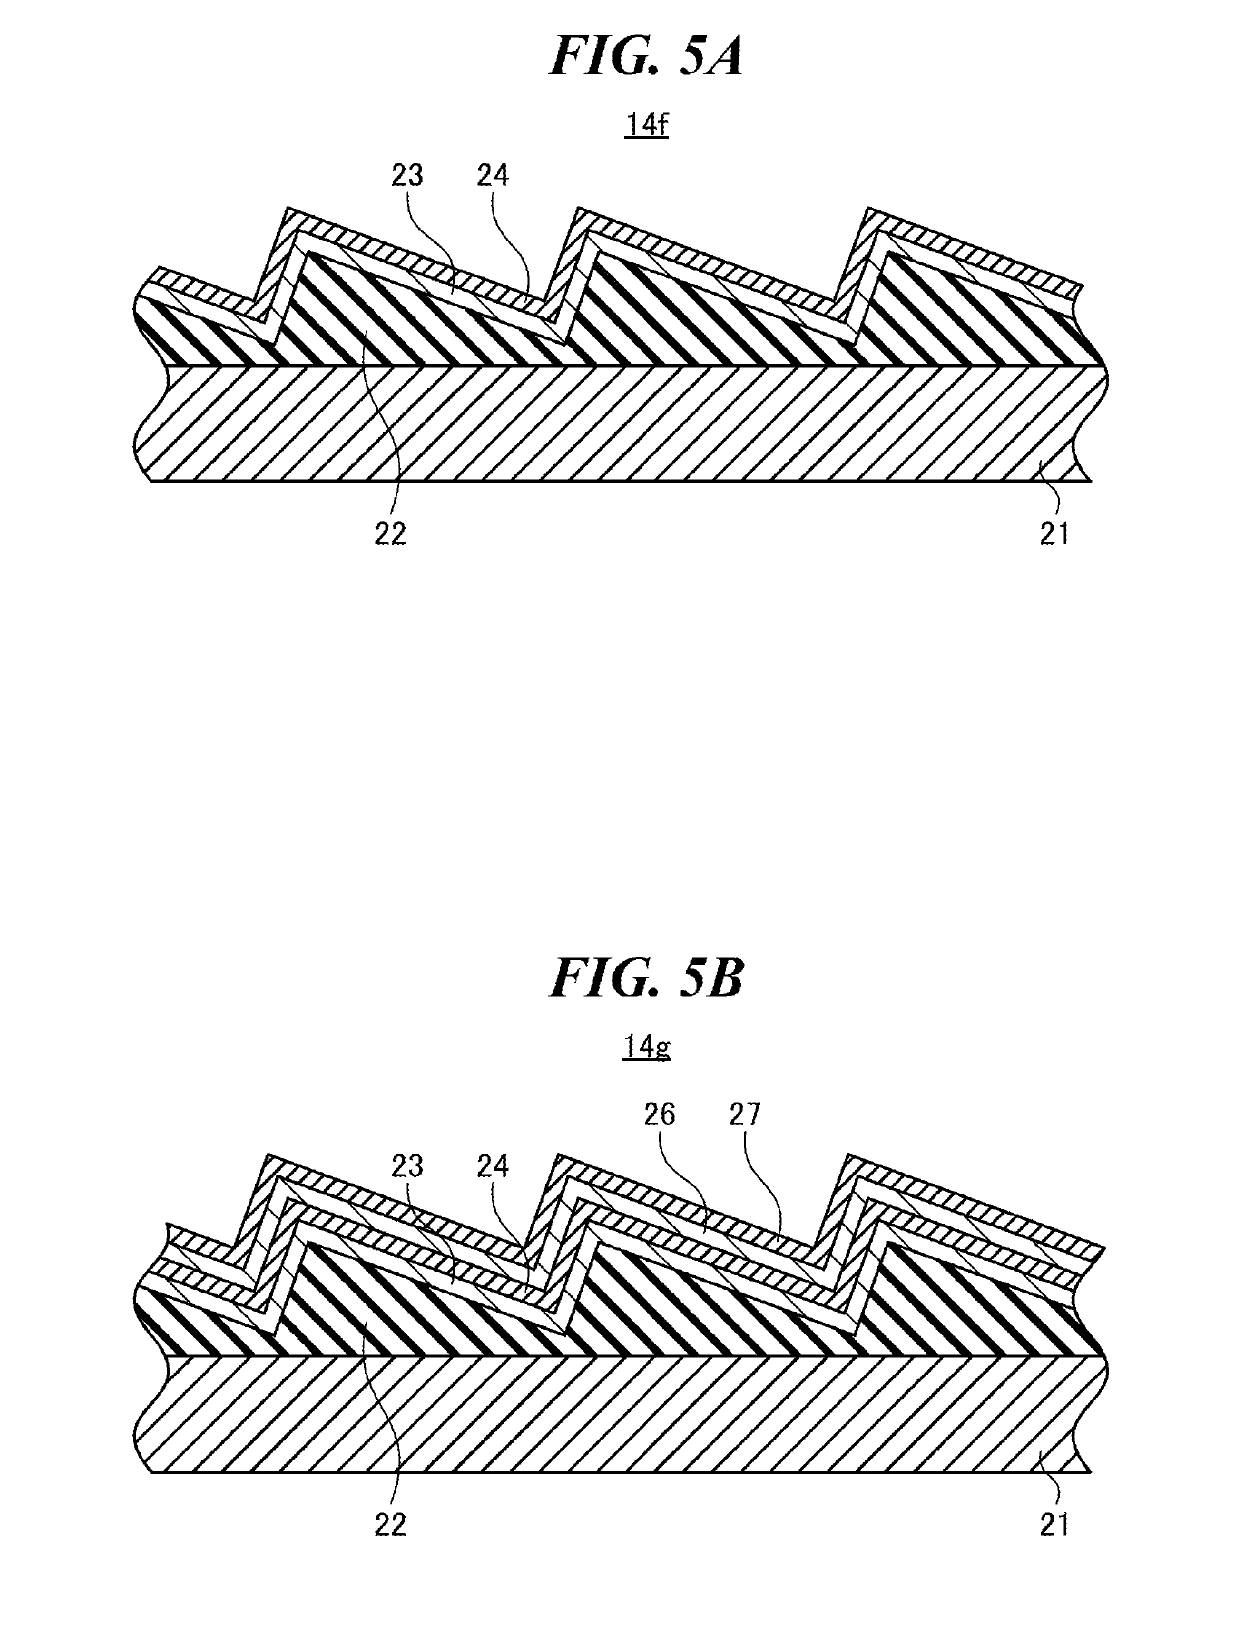 Grating, method for manufacturing grating, and method for recycling grating